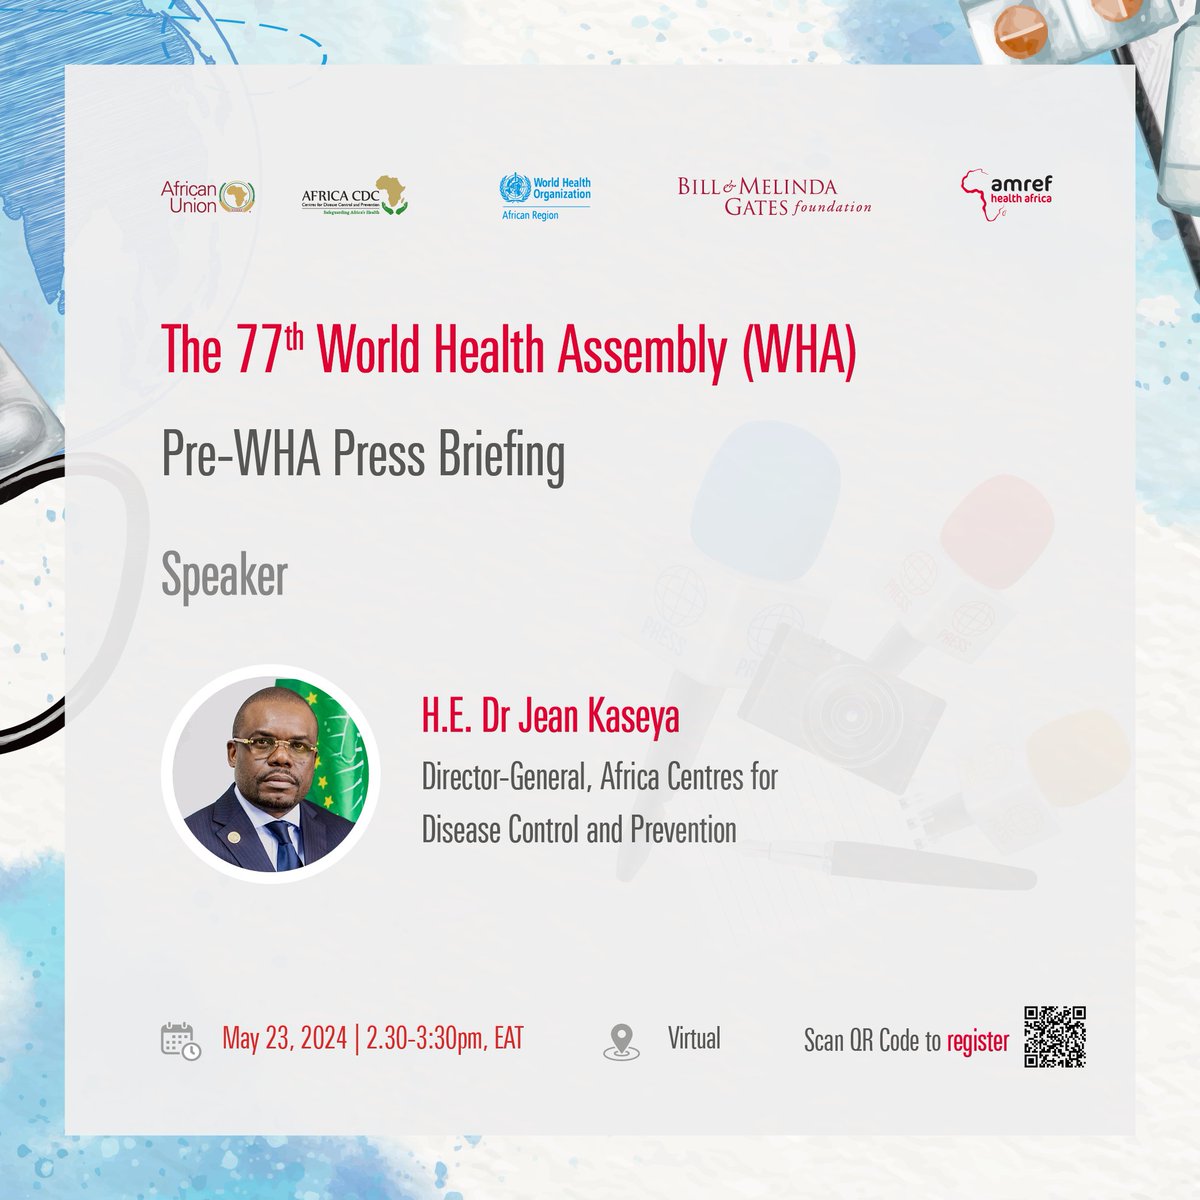 Engage with H.E. Dr. @JeanKaseya2, Director General @AfricaCDC, at the pre-WHA77 press briefing tomorrow (May 23rd, 2024) as he discusses public health emergencies and health system strengthening. Join the discussion about key strategies to tackle Africa’s health challenges.